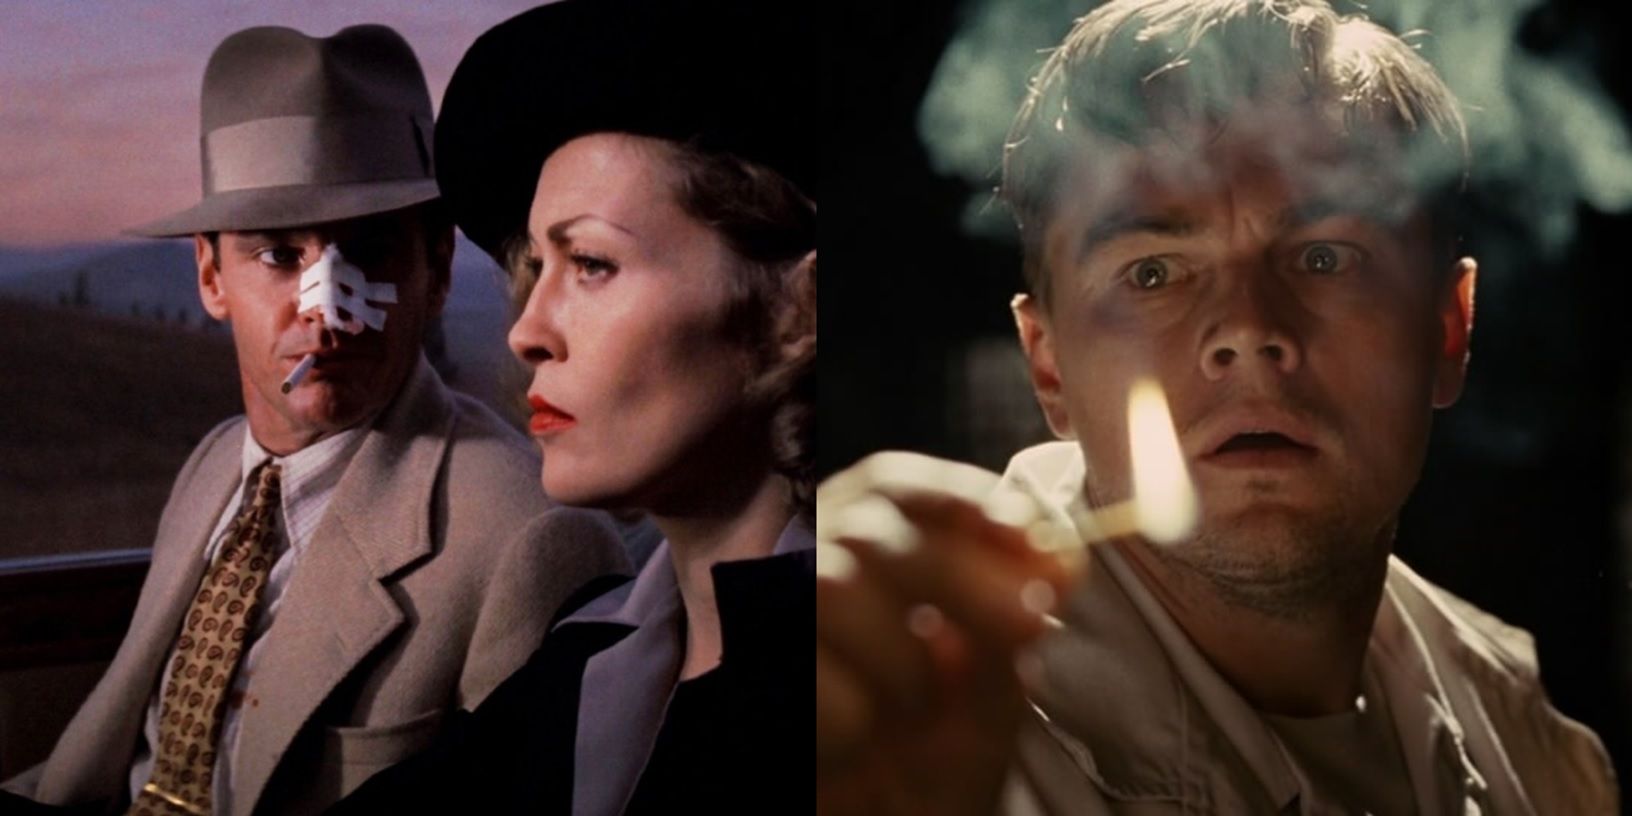 Side by side images of Jack Nicholson in Chinatwon and Leonardo DiCaprio in Shutter Island